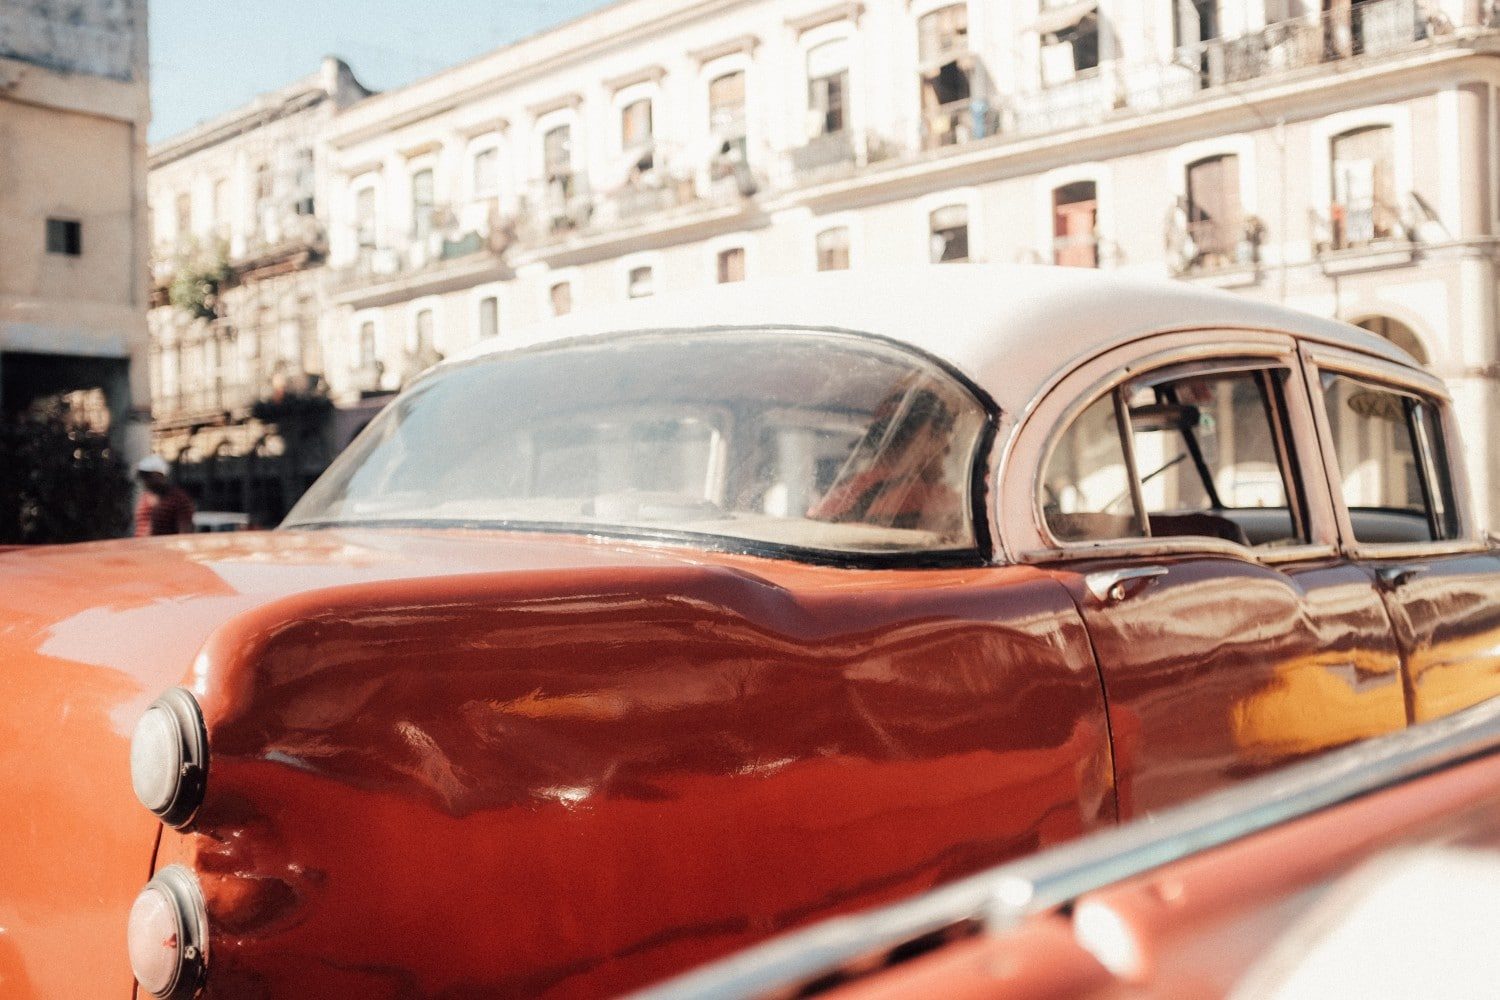 The Best Things to do in Havana. Havana should be at the top of your Cuba travel itinerary. We've picked the best sights, places to drink and more to help you discover Hemingway's beloved city. Read now #cuba #travel #havana